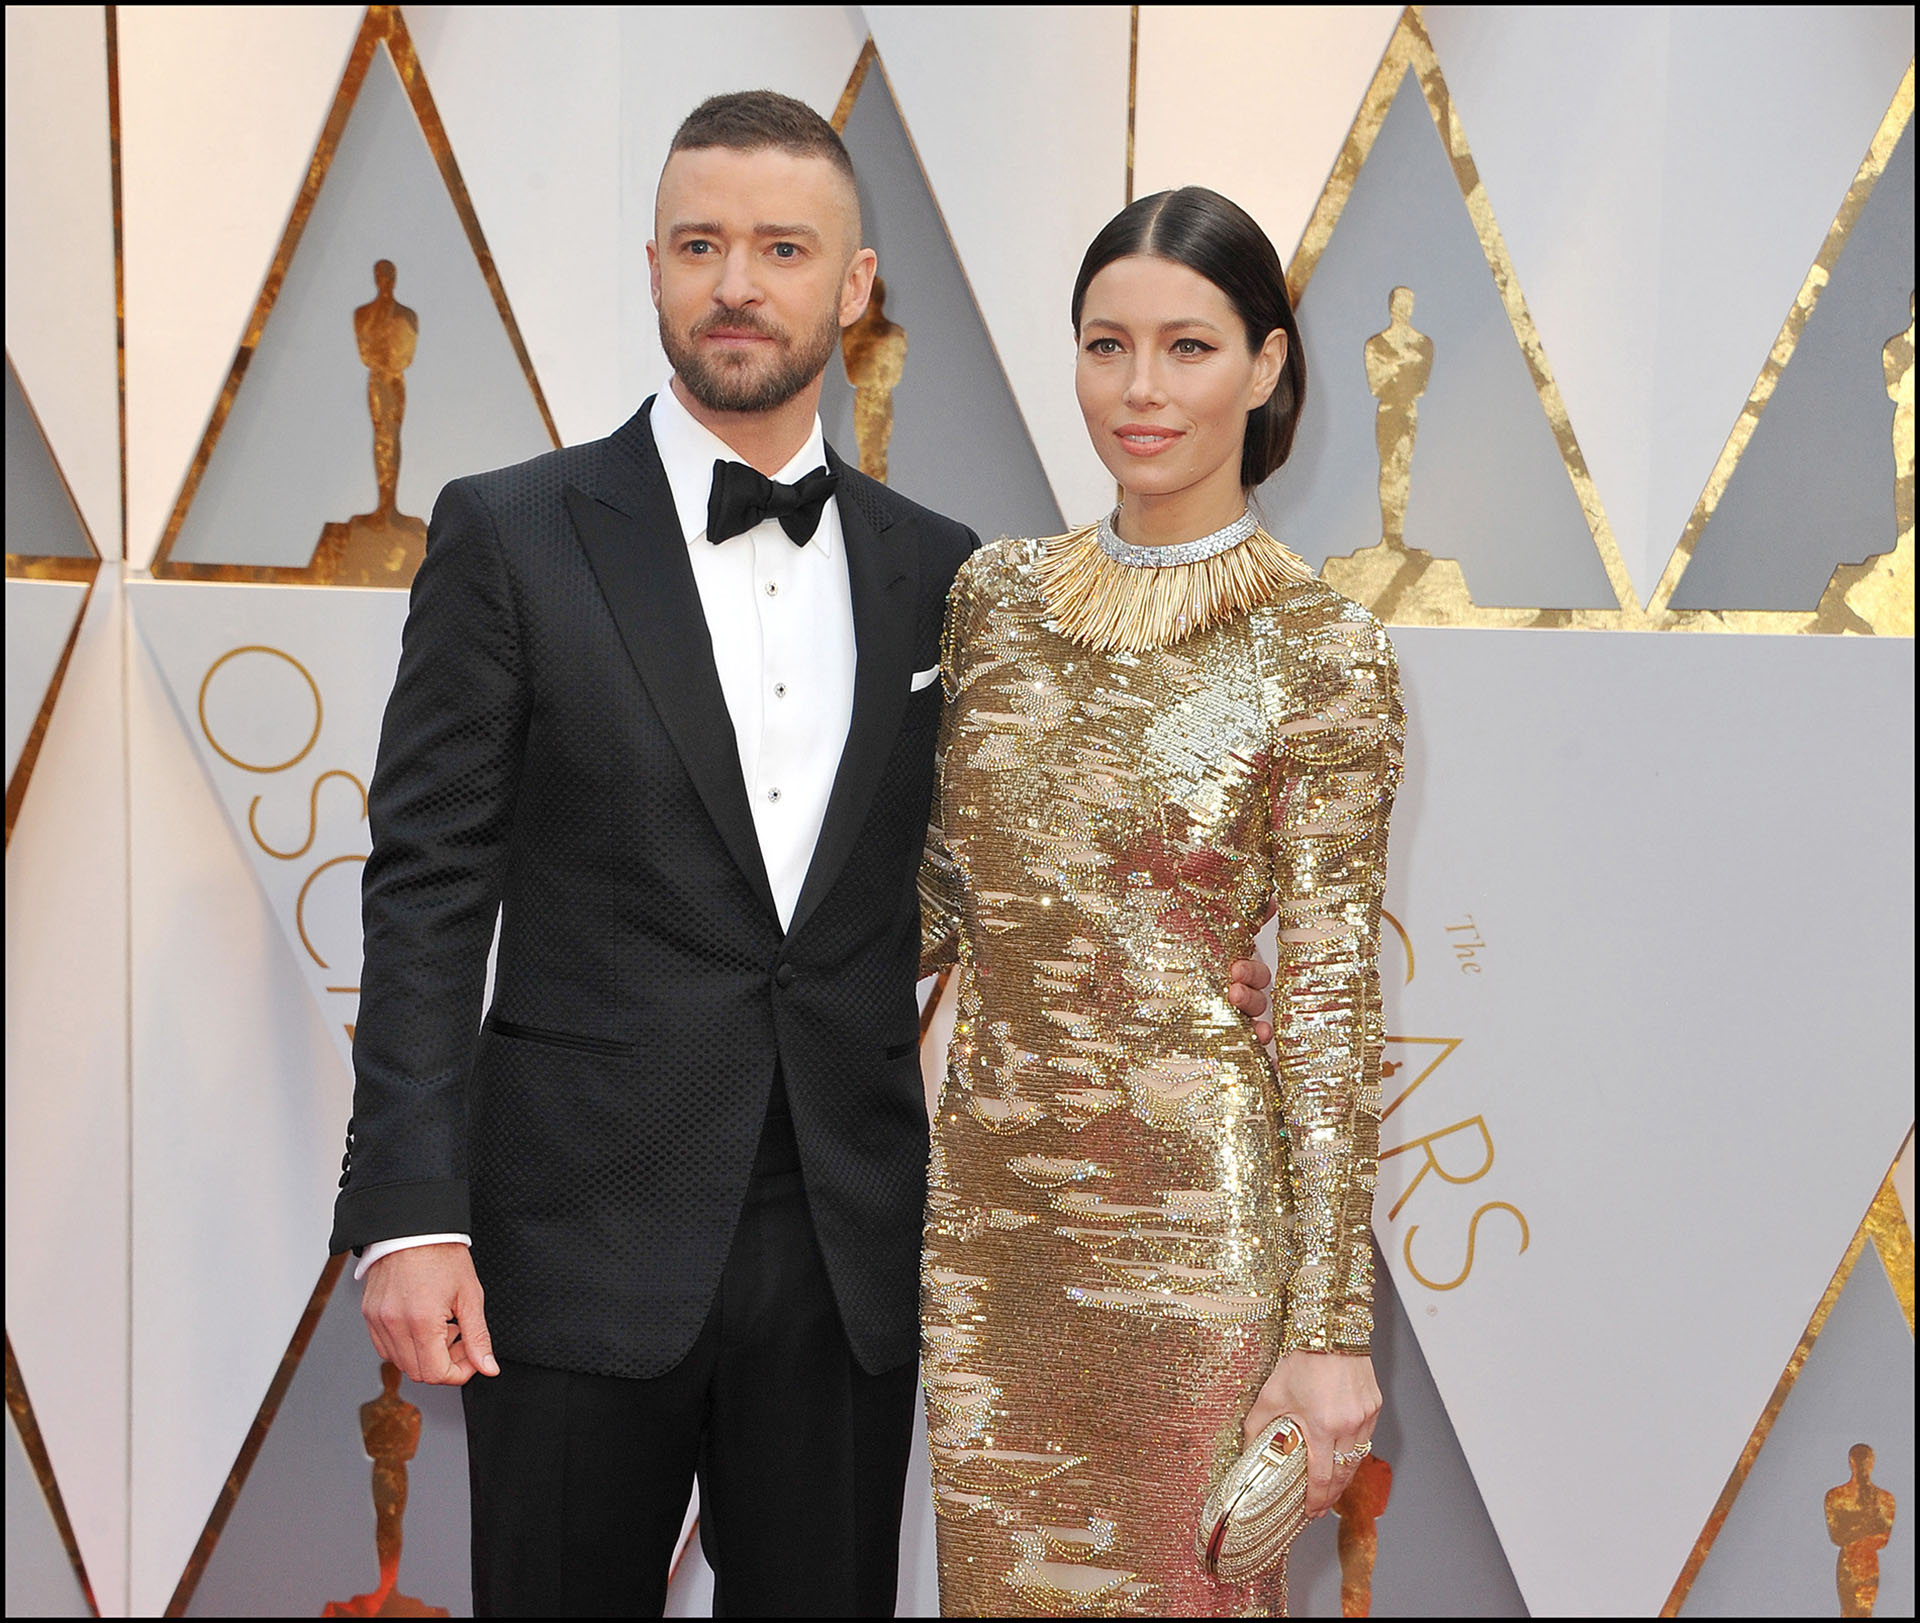 Jessica Biel wearing Kaufman Franco and Justin Timberlake at the 89th Annual Academy Awards held at the Hollywood and Highland Center in Hollywood, USA on February 26, 2017.